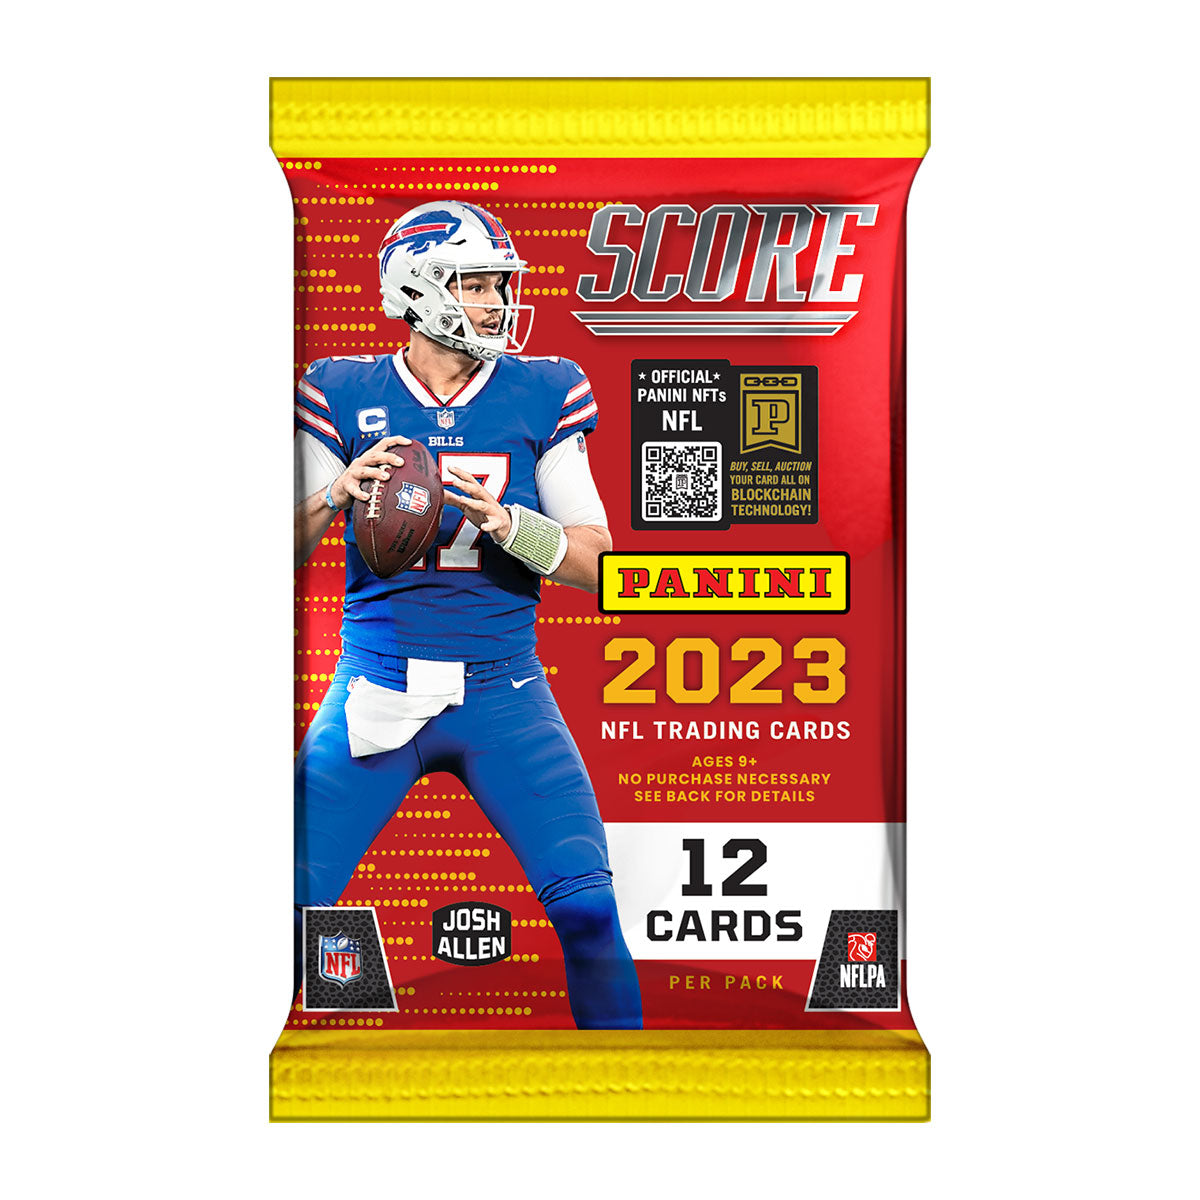 2023 Panini Score Football NFL Factory Sealed Pack of Trading Cards - 12  Cards Per Pack